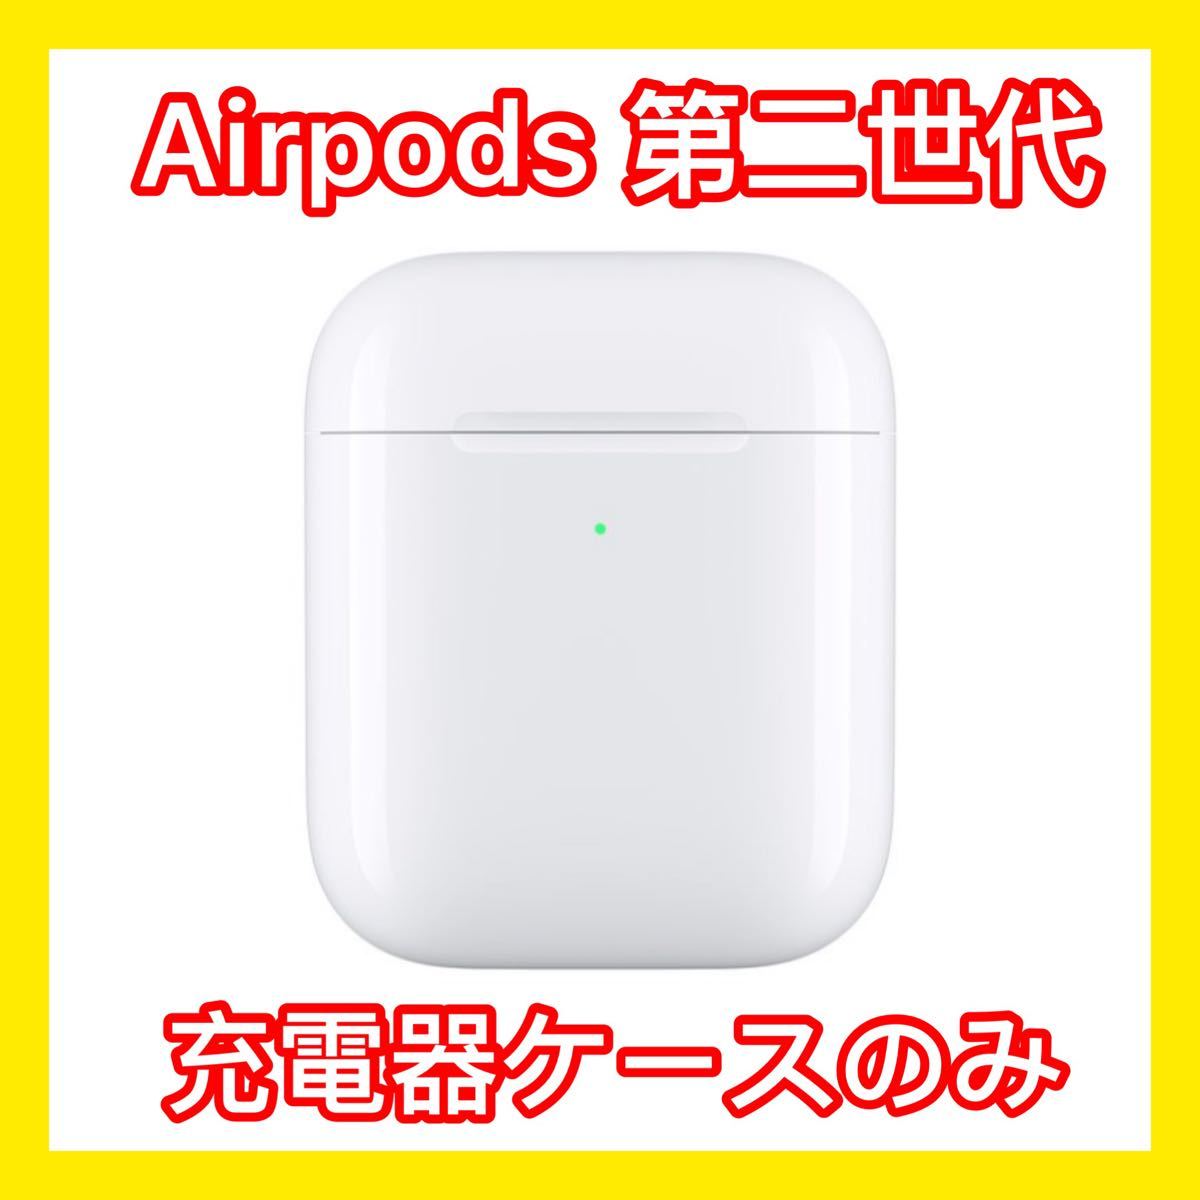 PayPayフリマ｜AirPods エアーポッズ ワイヤレス充電ケース 第二世代 第2世代 正規品